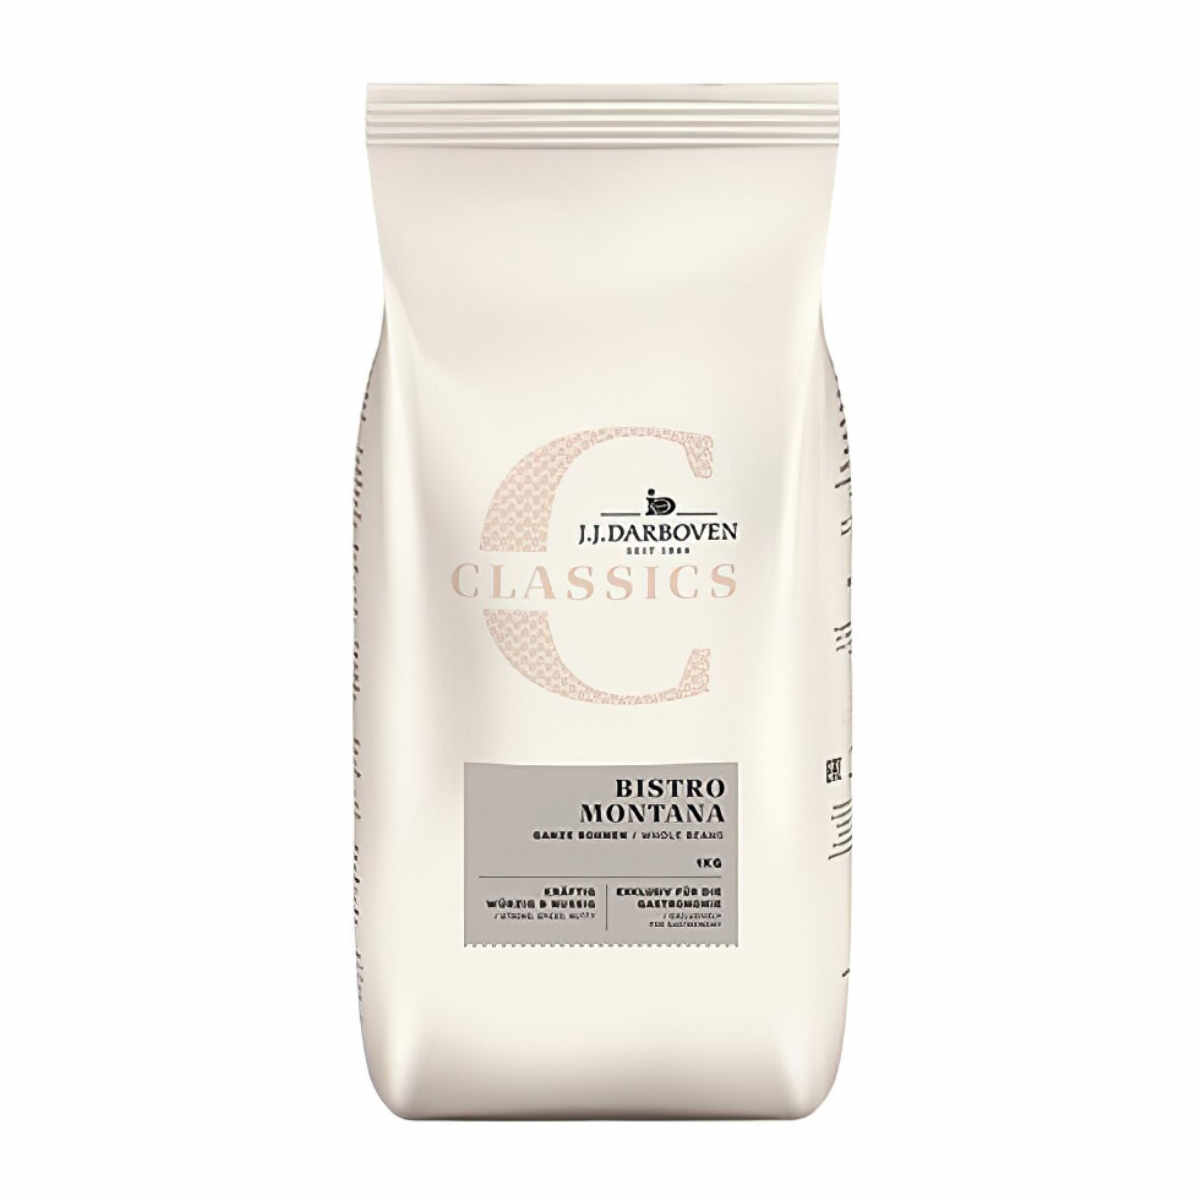 Darboven Creme Bistro Montana cafea boabe 1kg